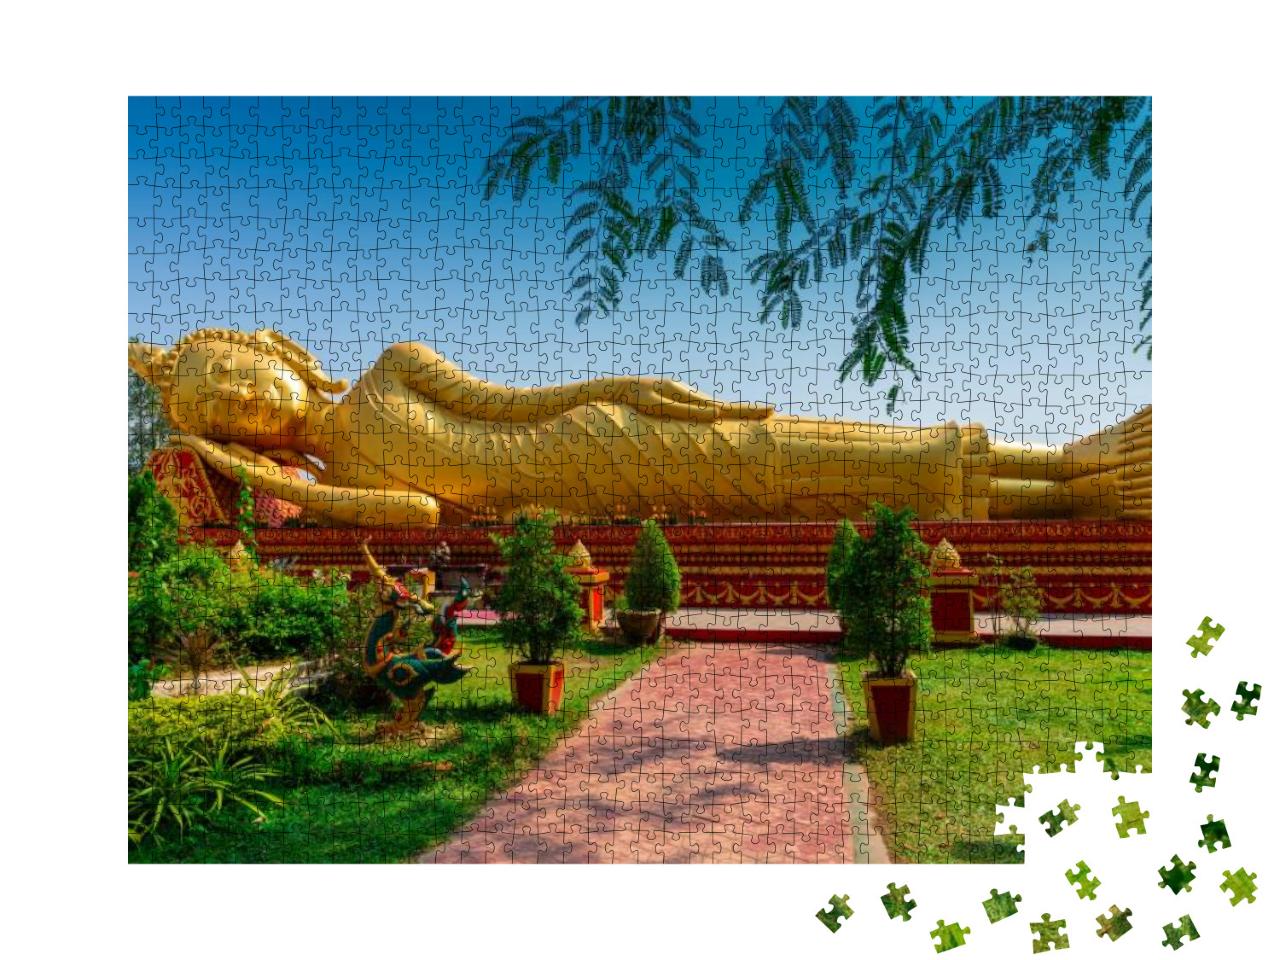 Sleeping Buddha At Wat Pha that Luang, Vientiane, Laos... Jigsaw Puzzle with 1000 pieces